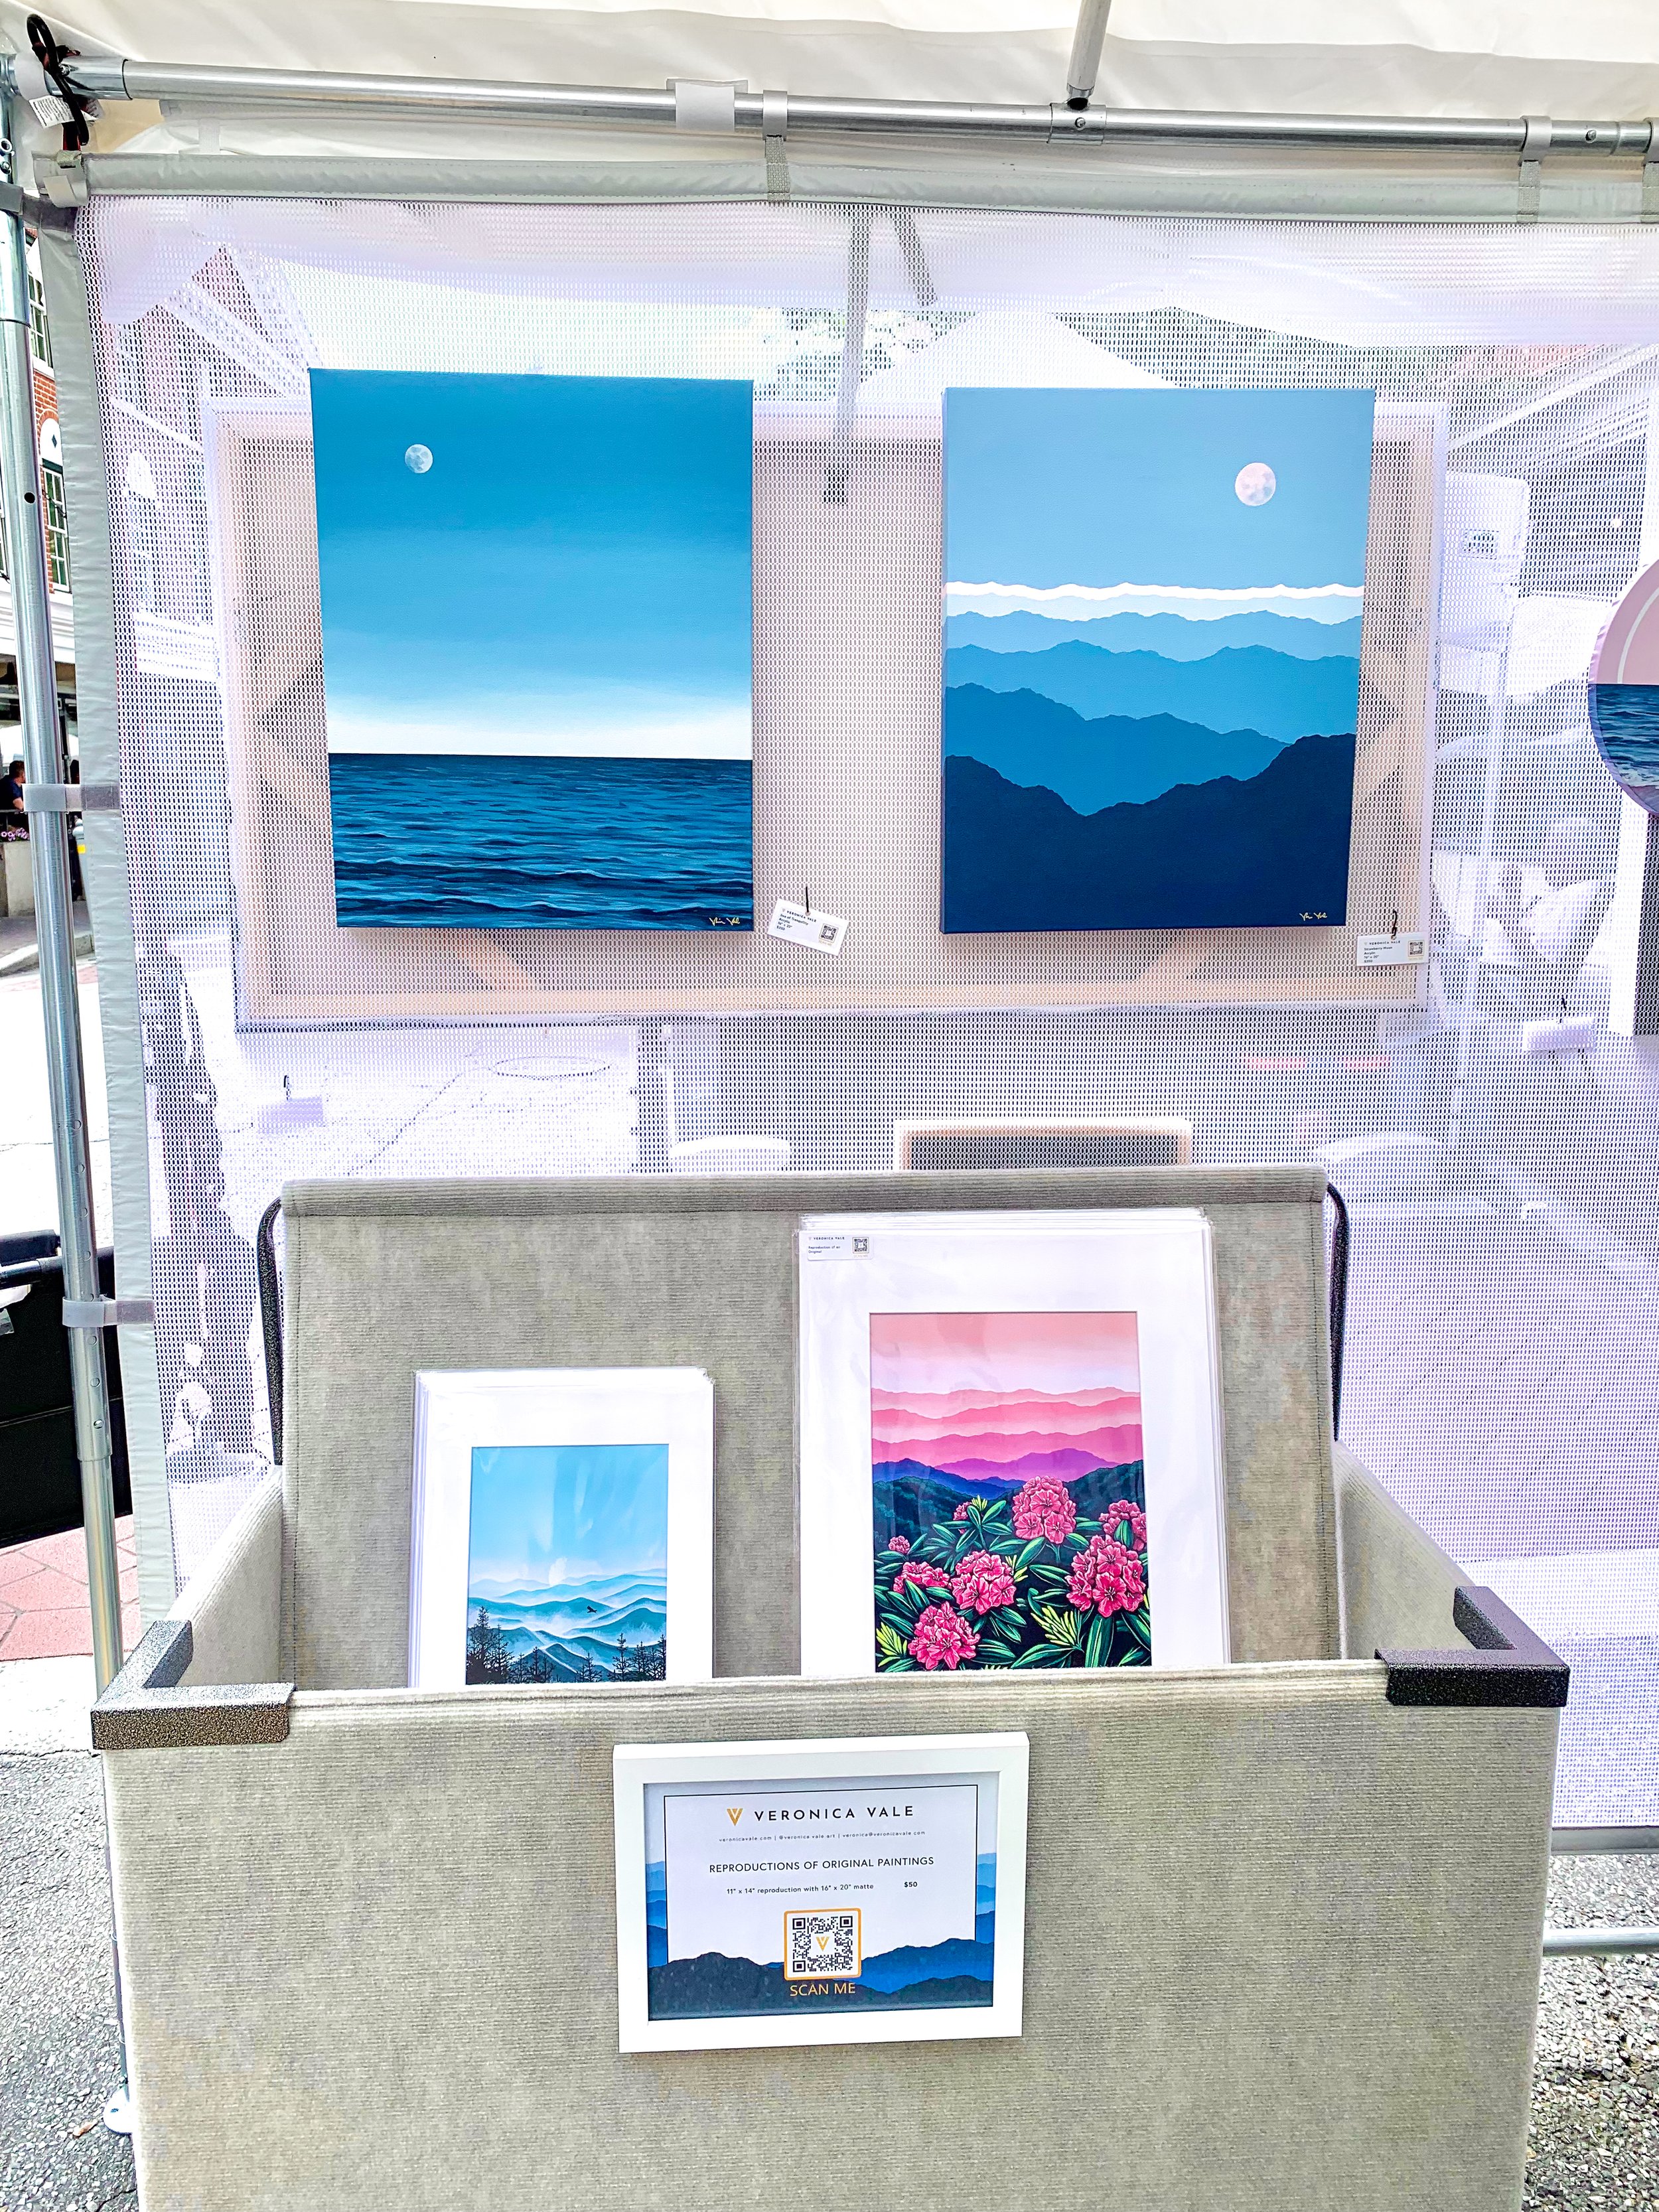 "Sea of Tranquility" and "Strawberry Moon" over the print display